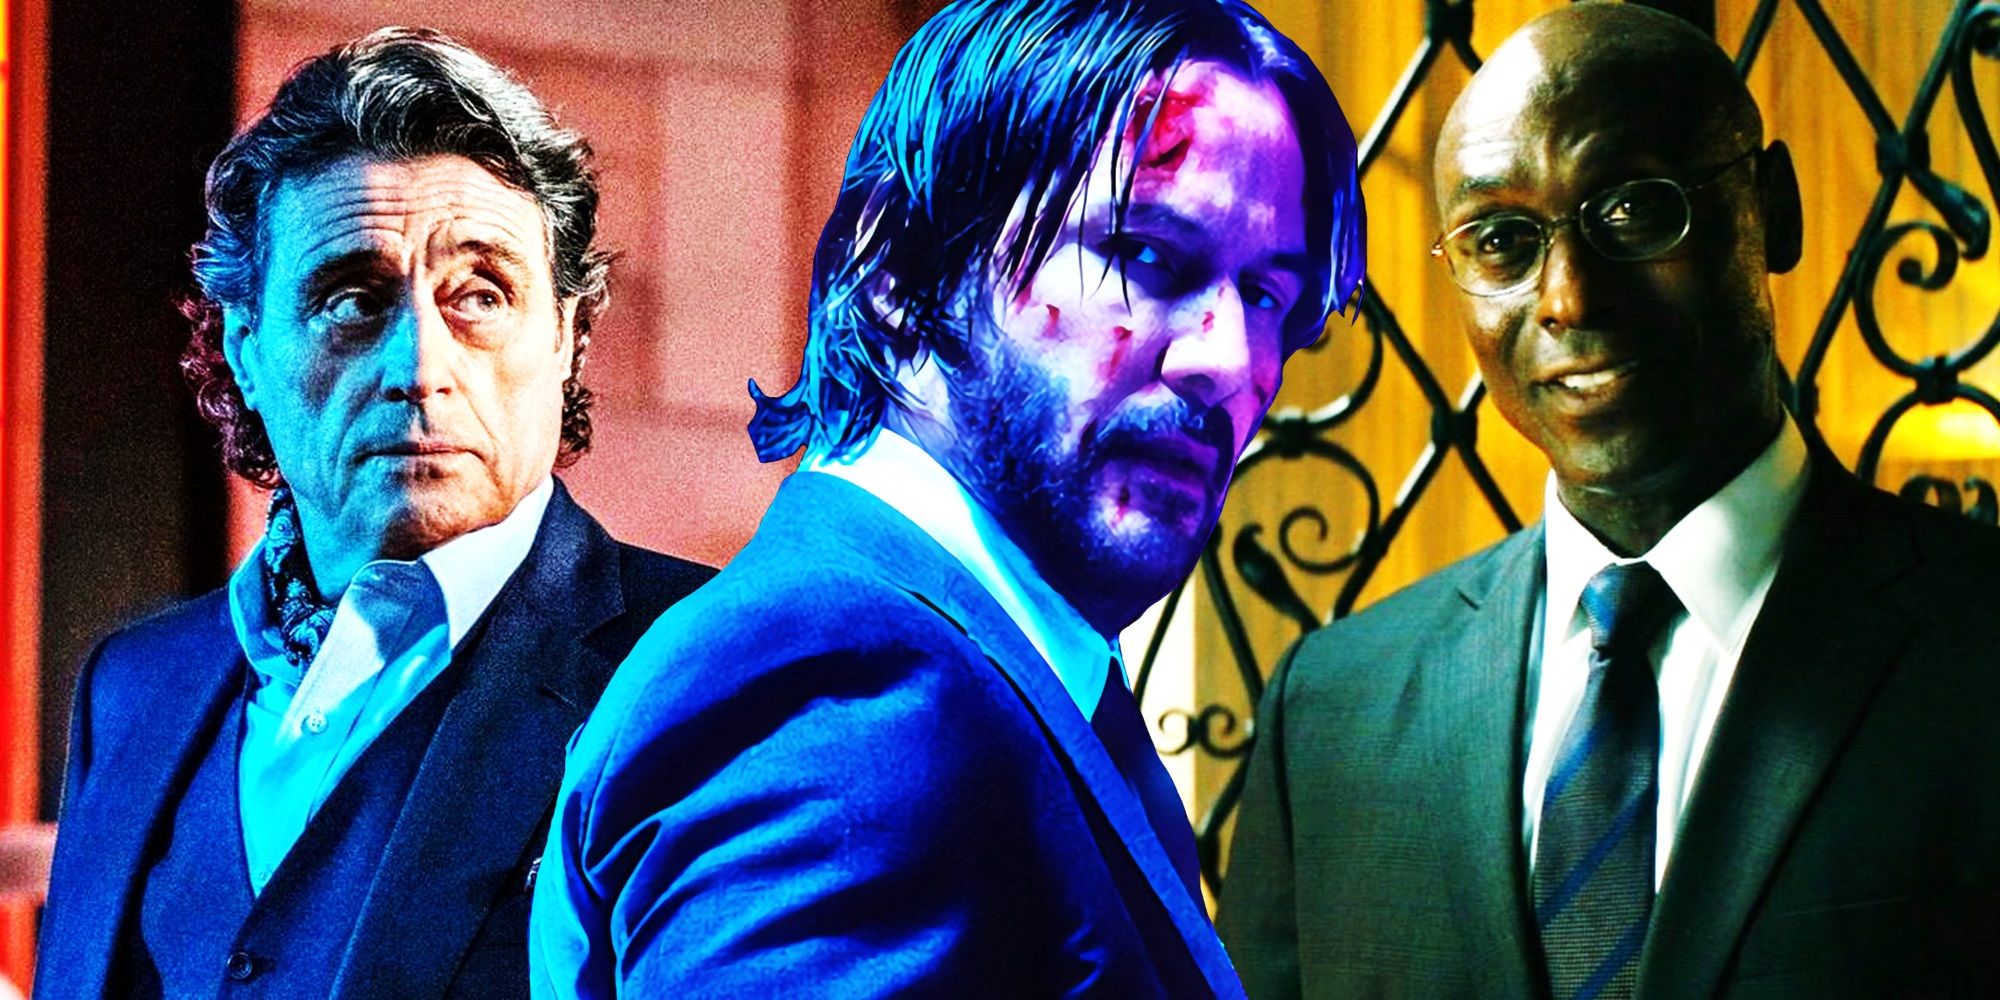 John Wick Began Two Very Different Action Director Careers (& They’re Both Great)